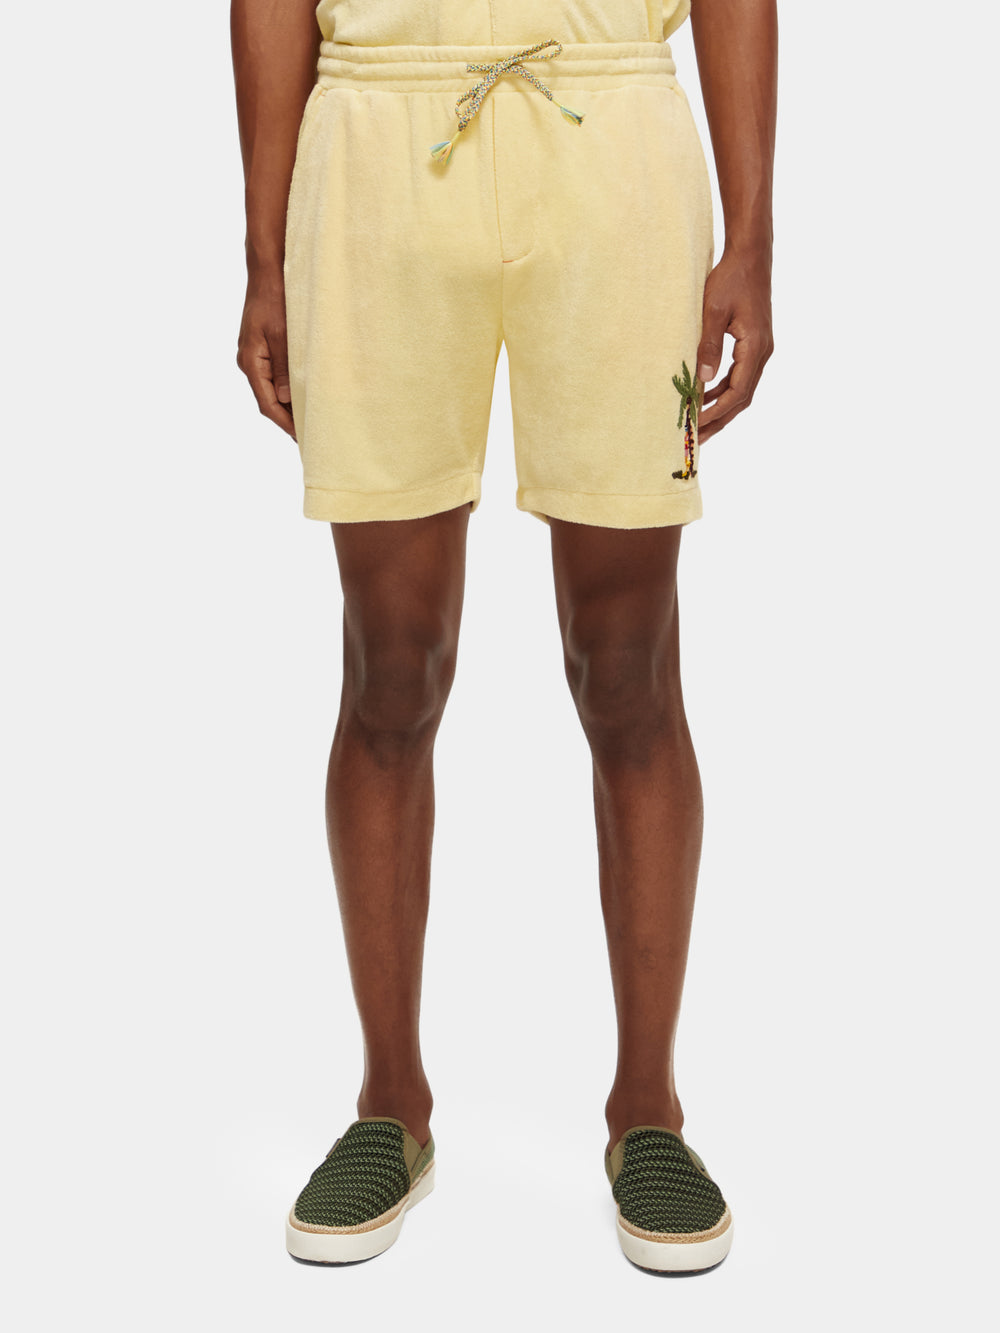 Toweling Bermuda shorts with embroidery - Scotch & Soda NZ